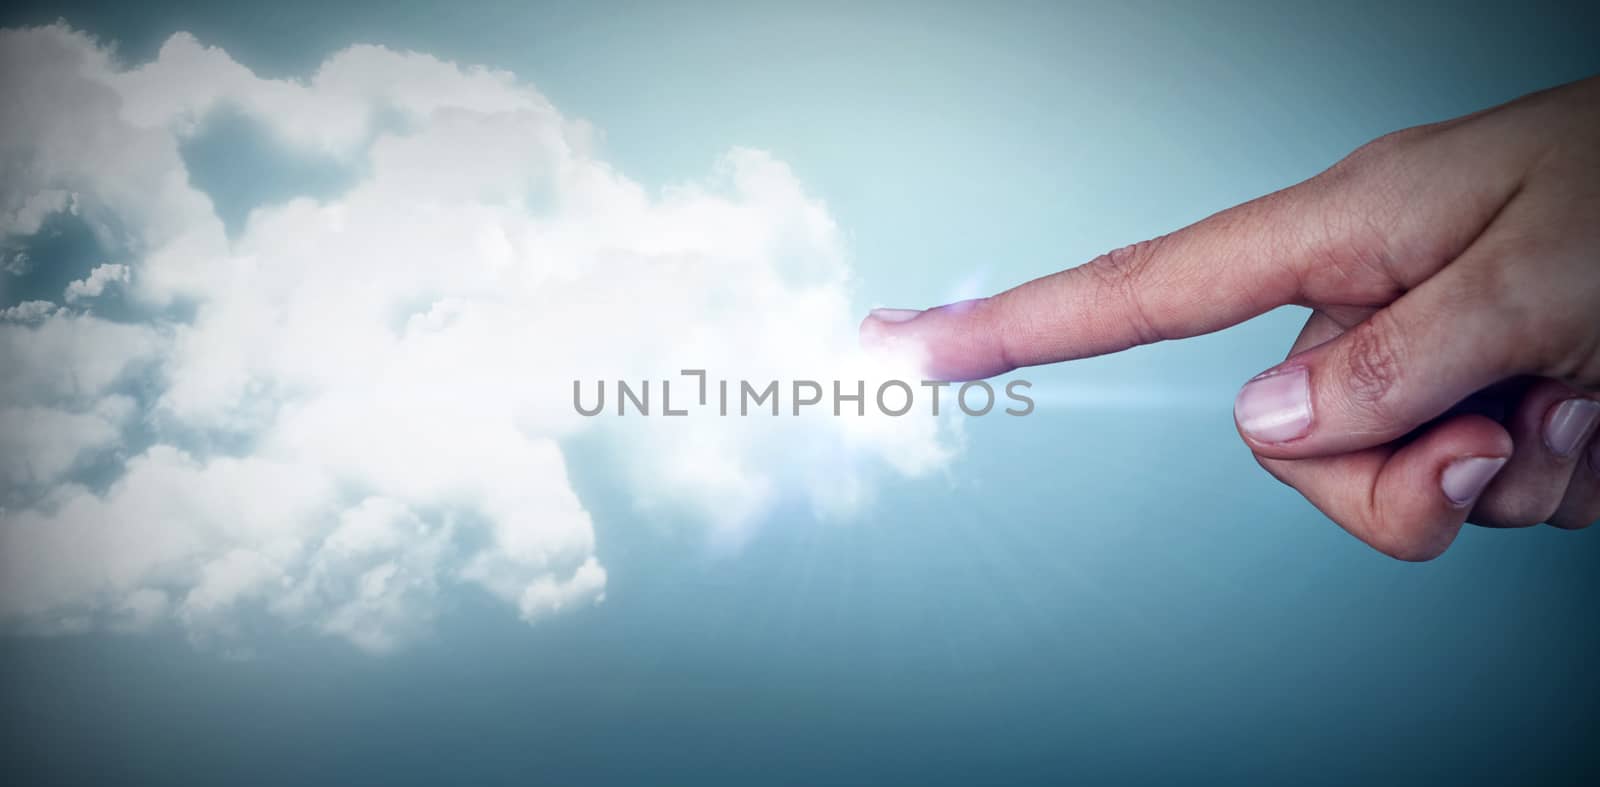 Human hand pointing on white background against grey vignette